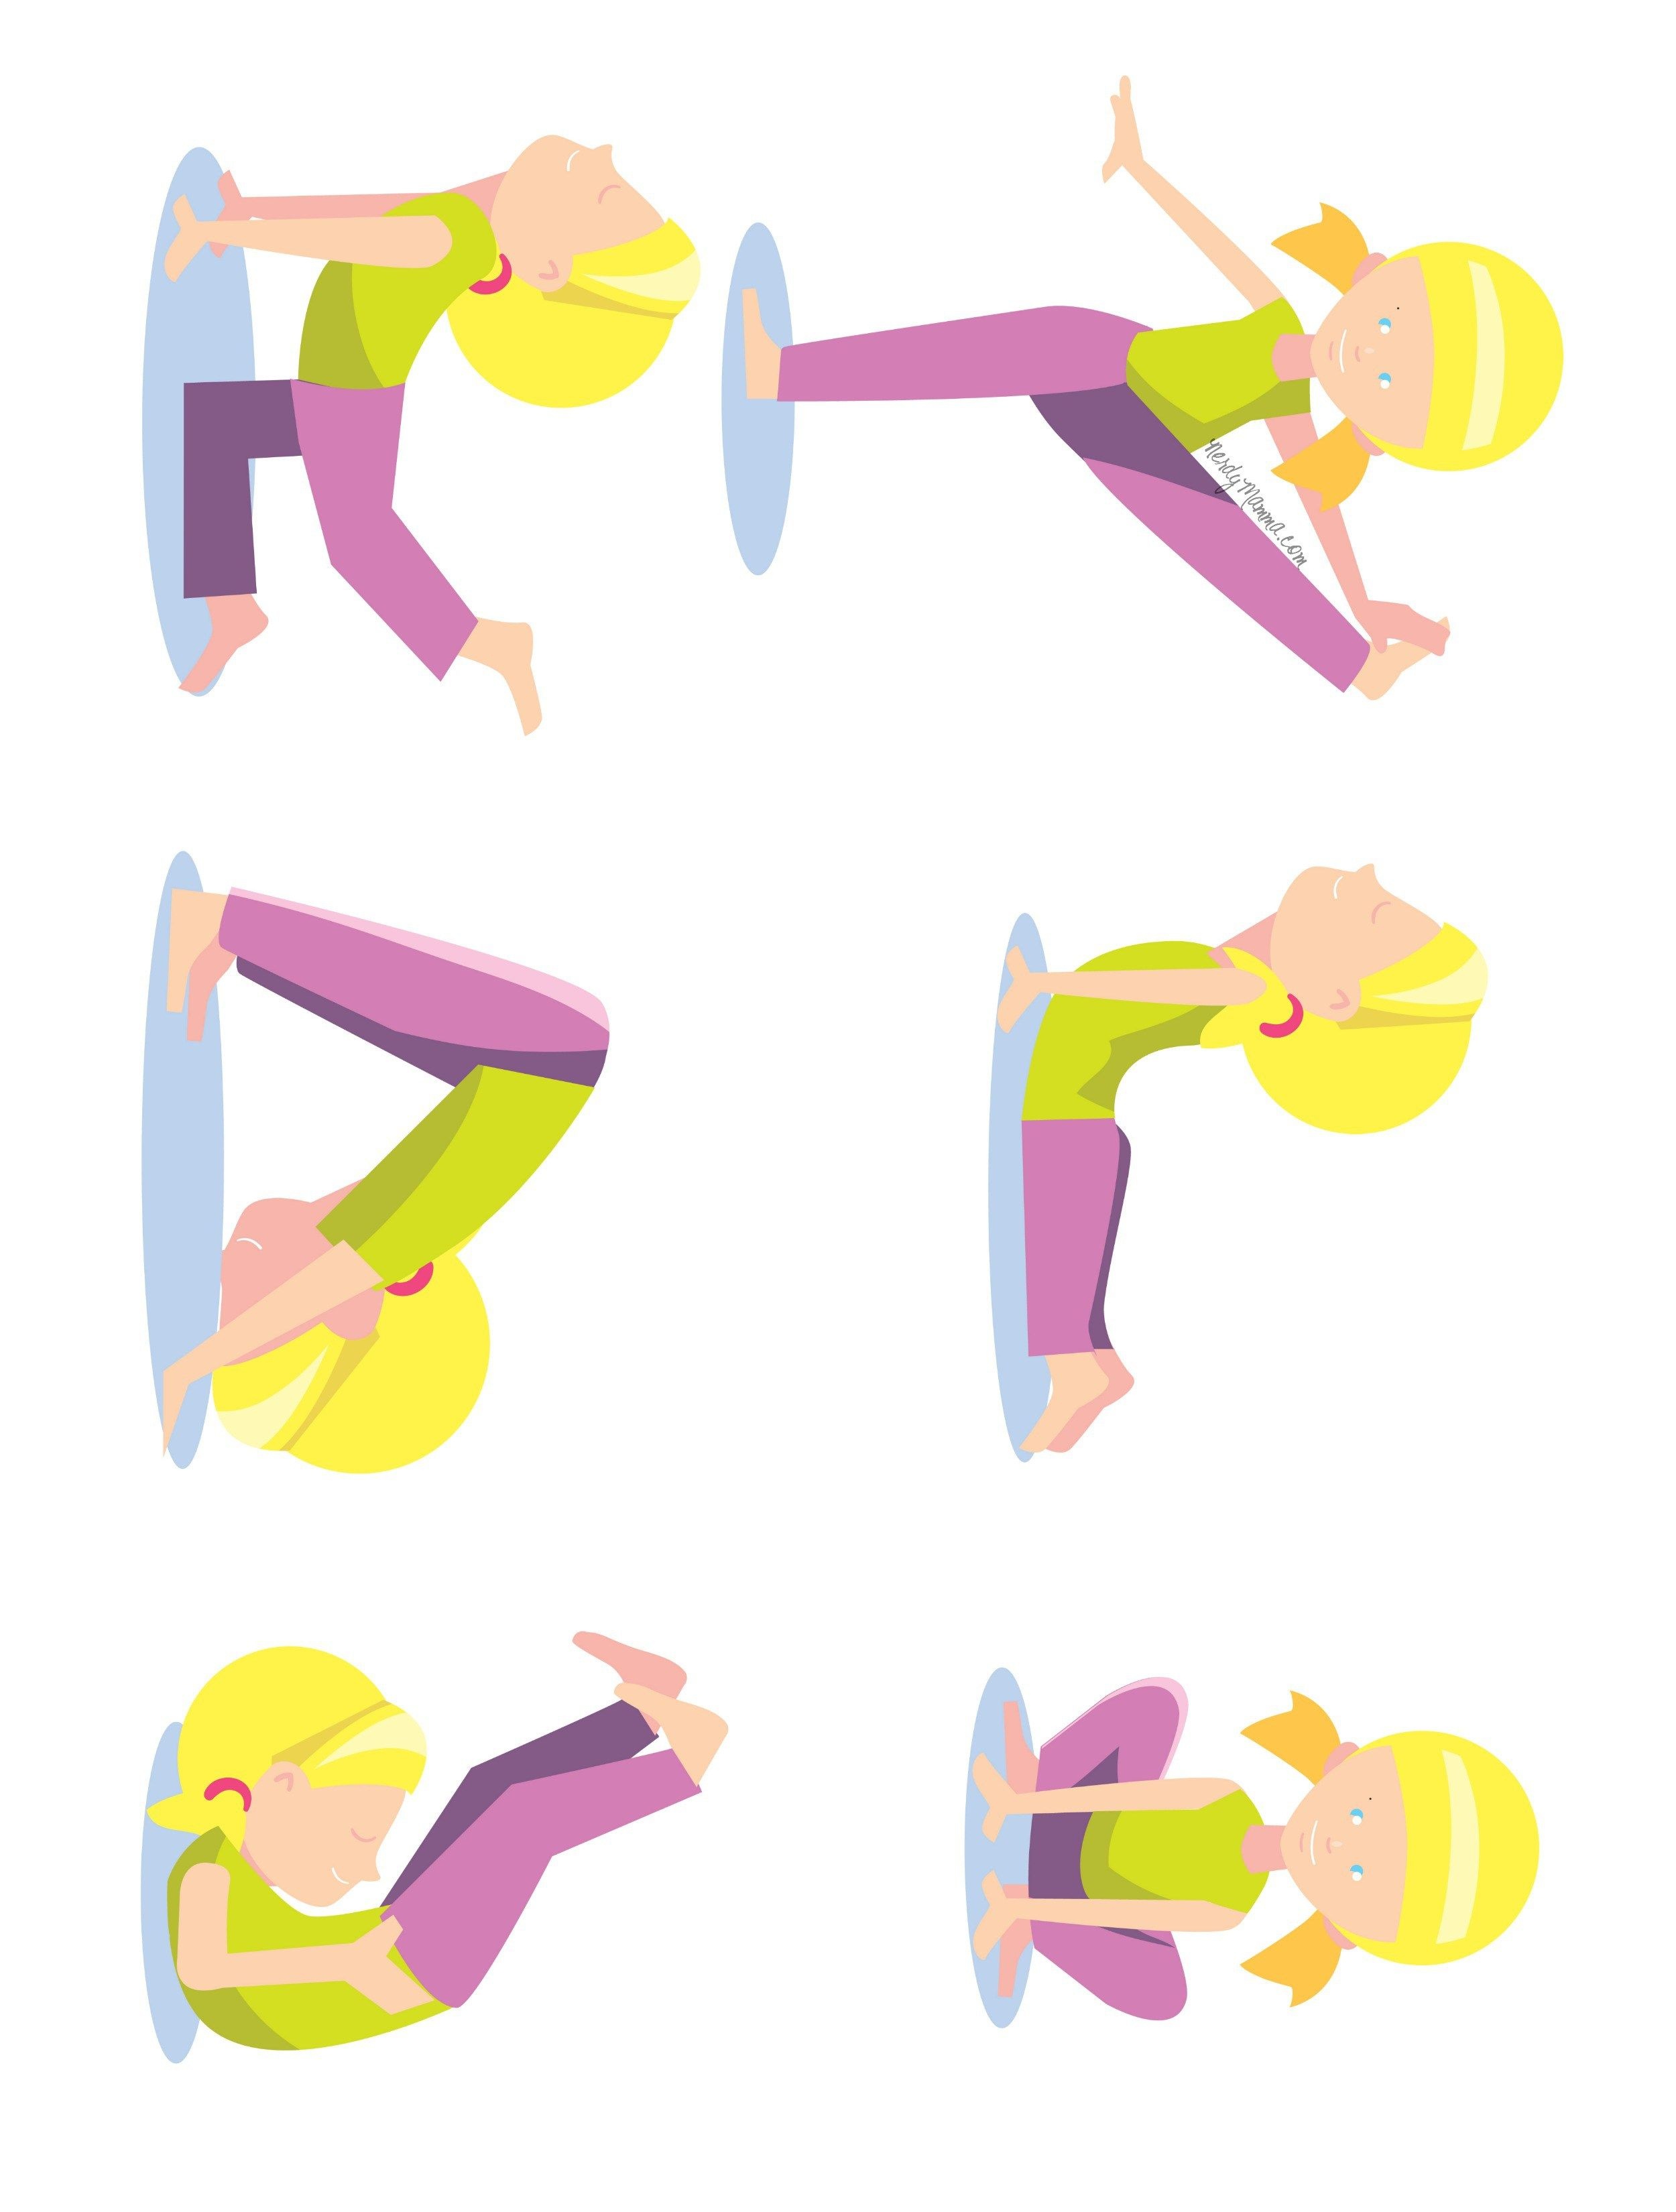 6 Easy Yoga Poses That Toddlers Can Do Free Printable | Yoga &amp;amp; Barre - Free Printable Yoga Poses